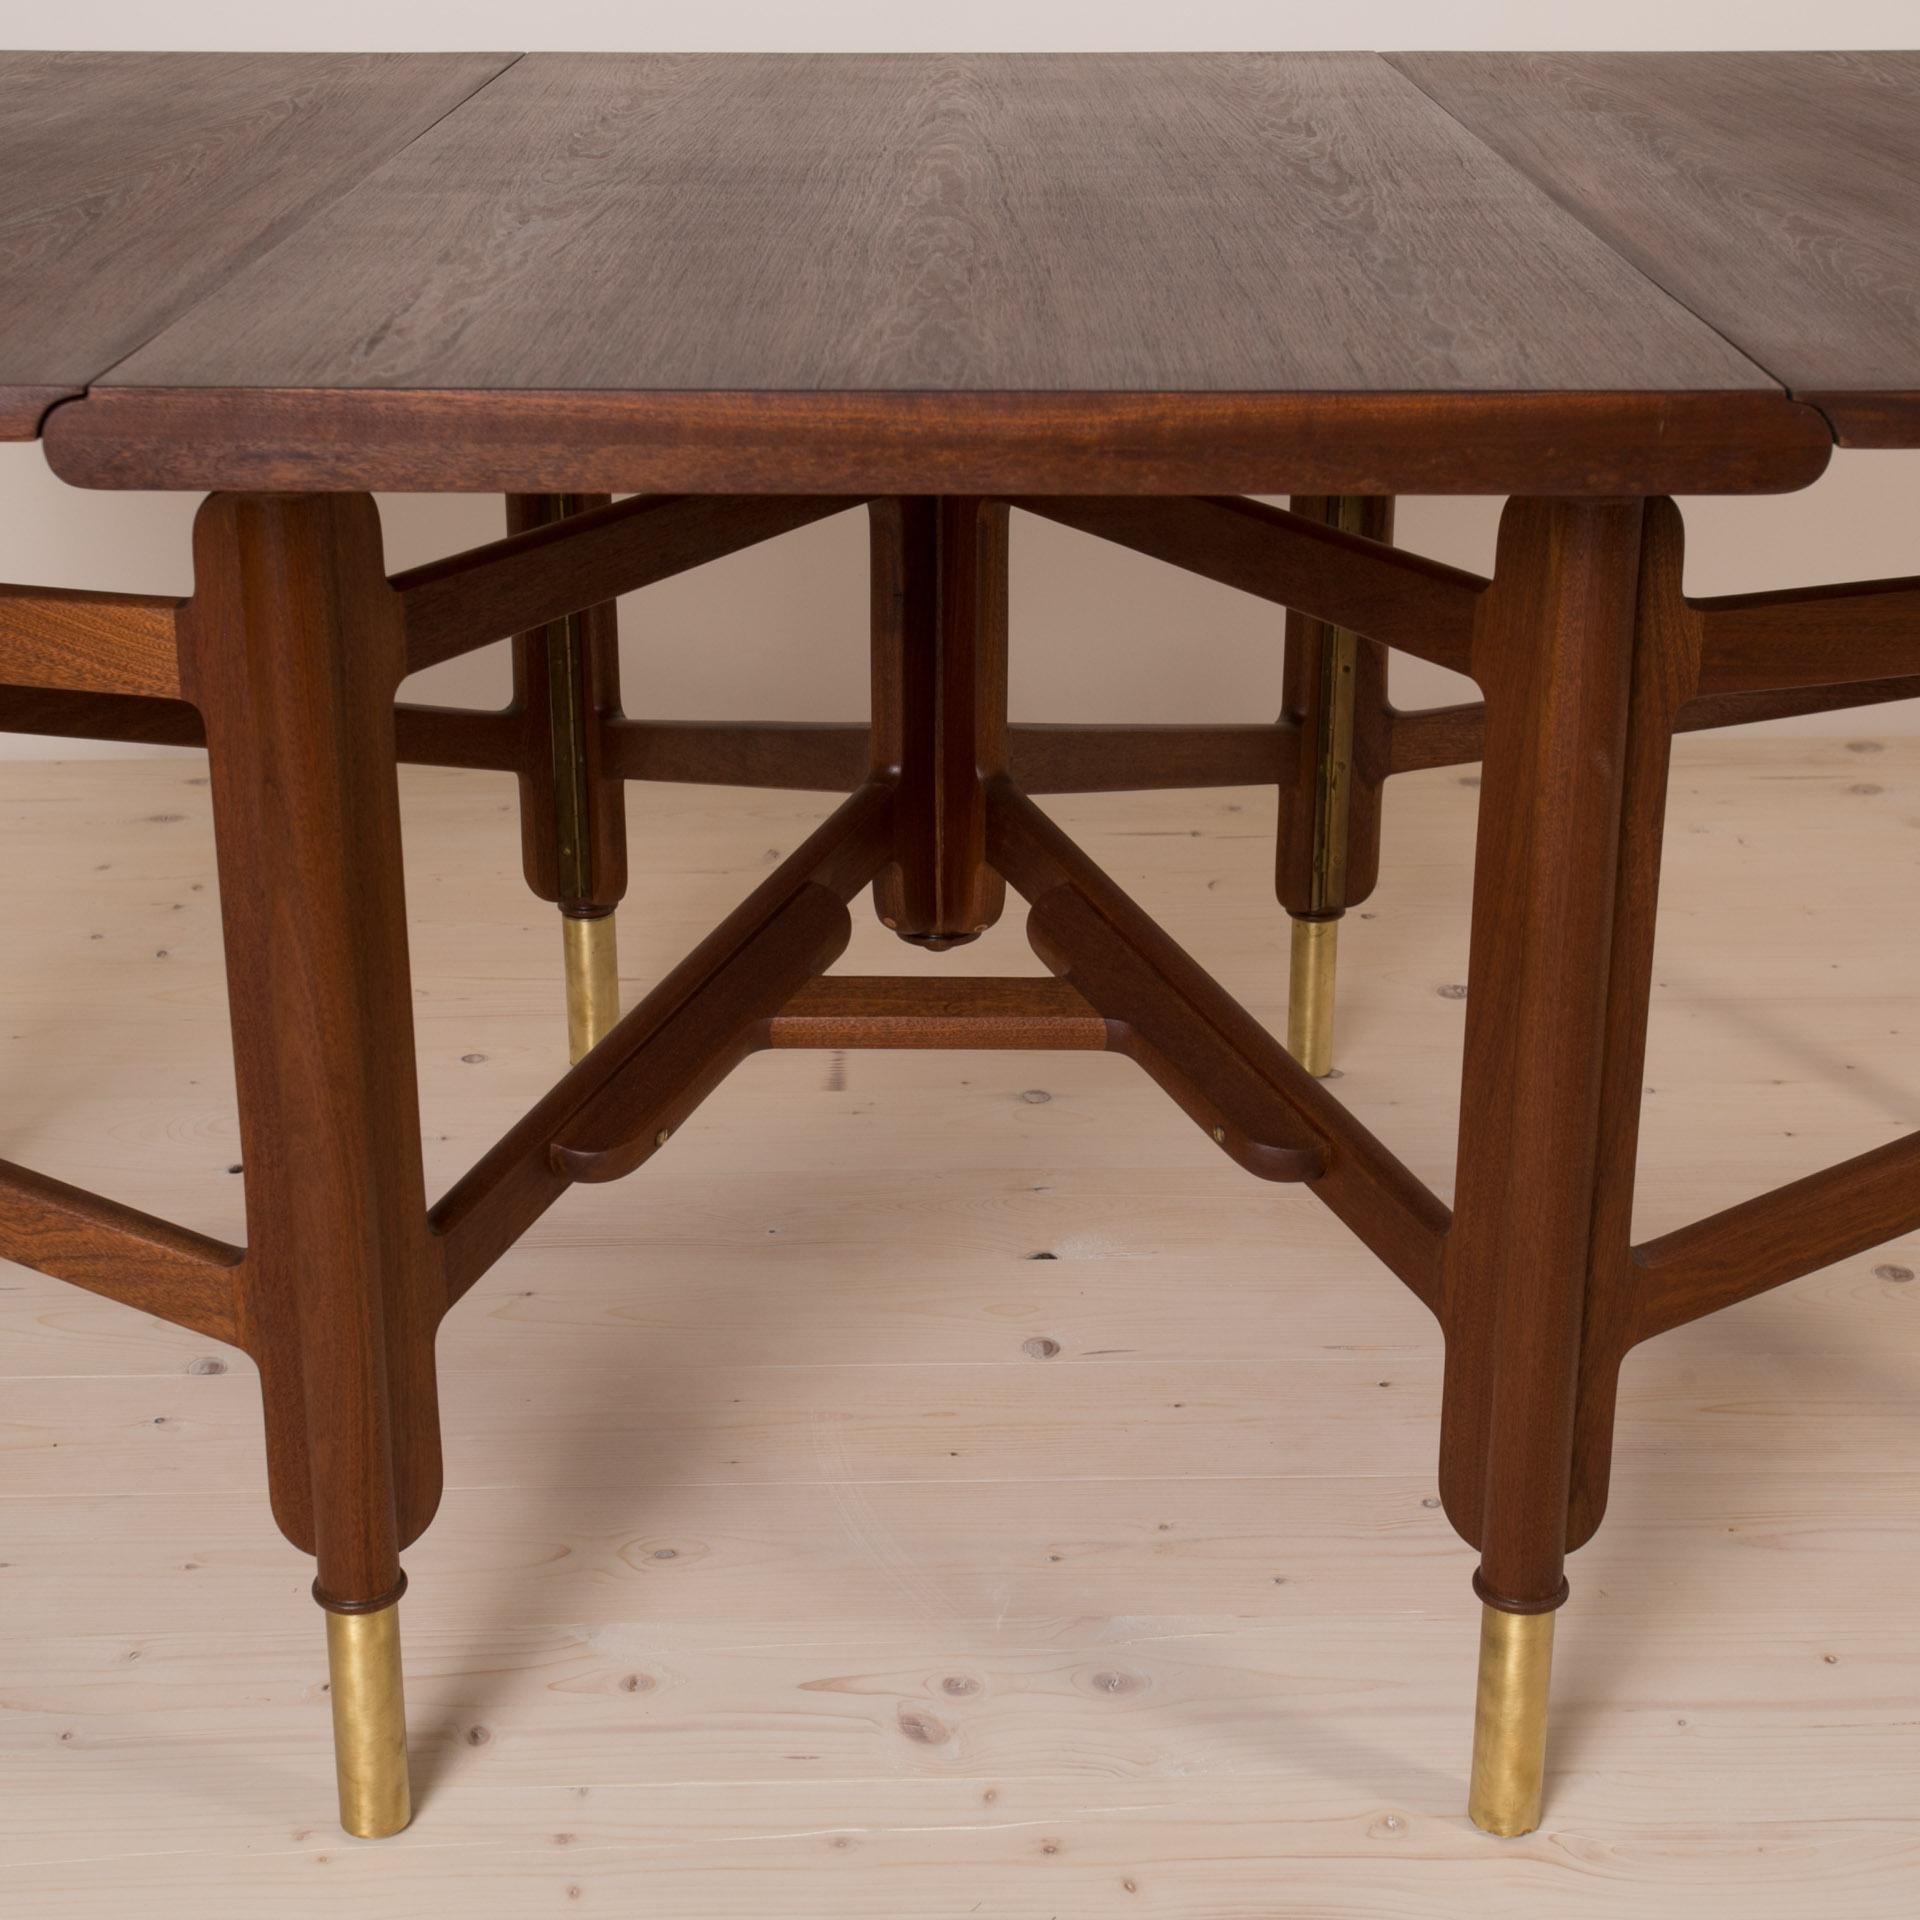 Midcentury Dining Table, Teak Wood, Brass Elements, Norway, 1950s For Sale 4